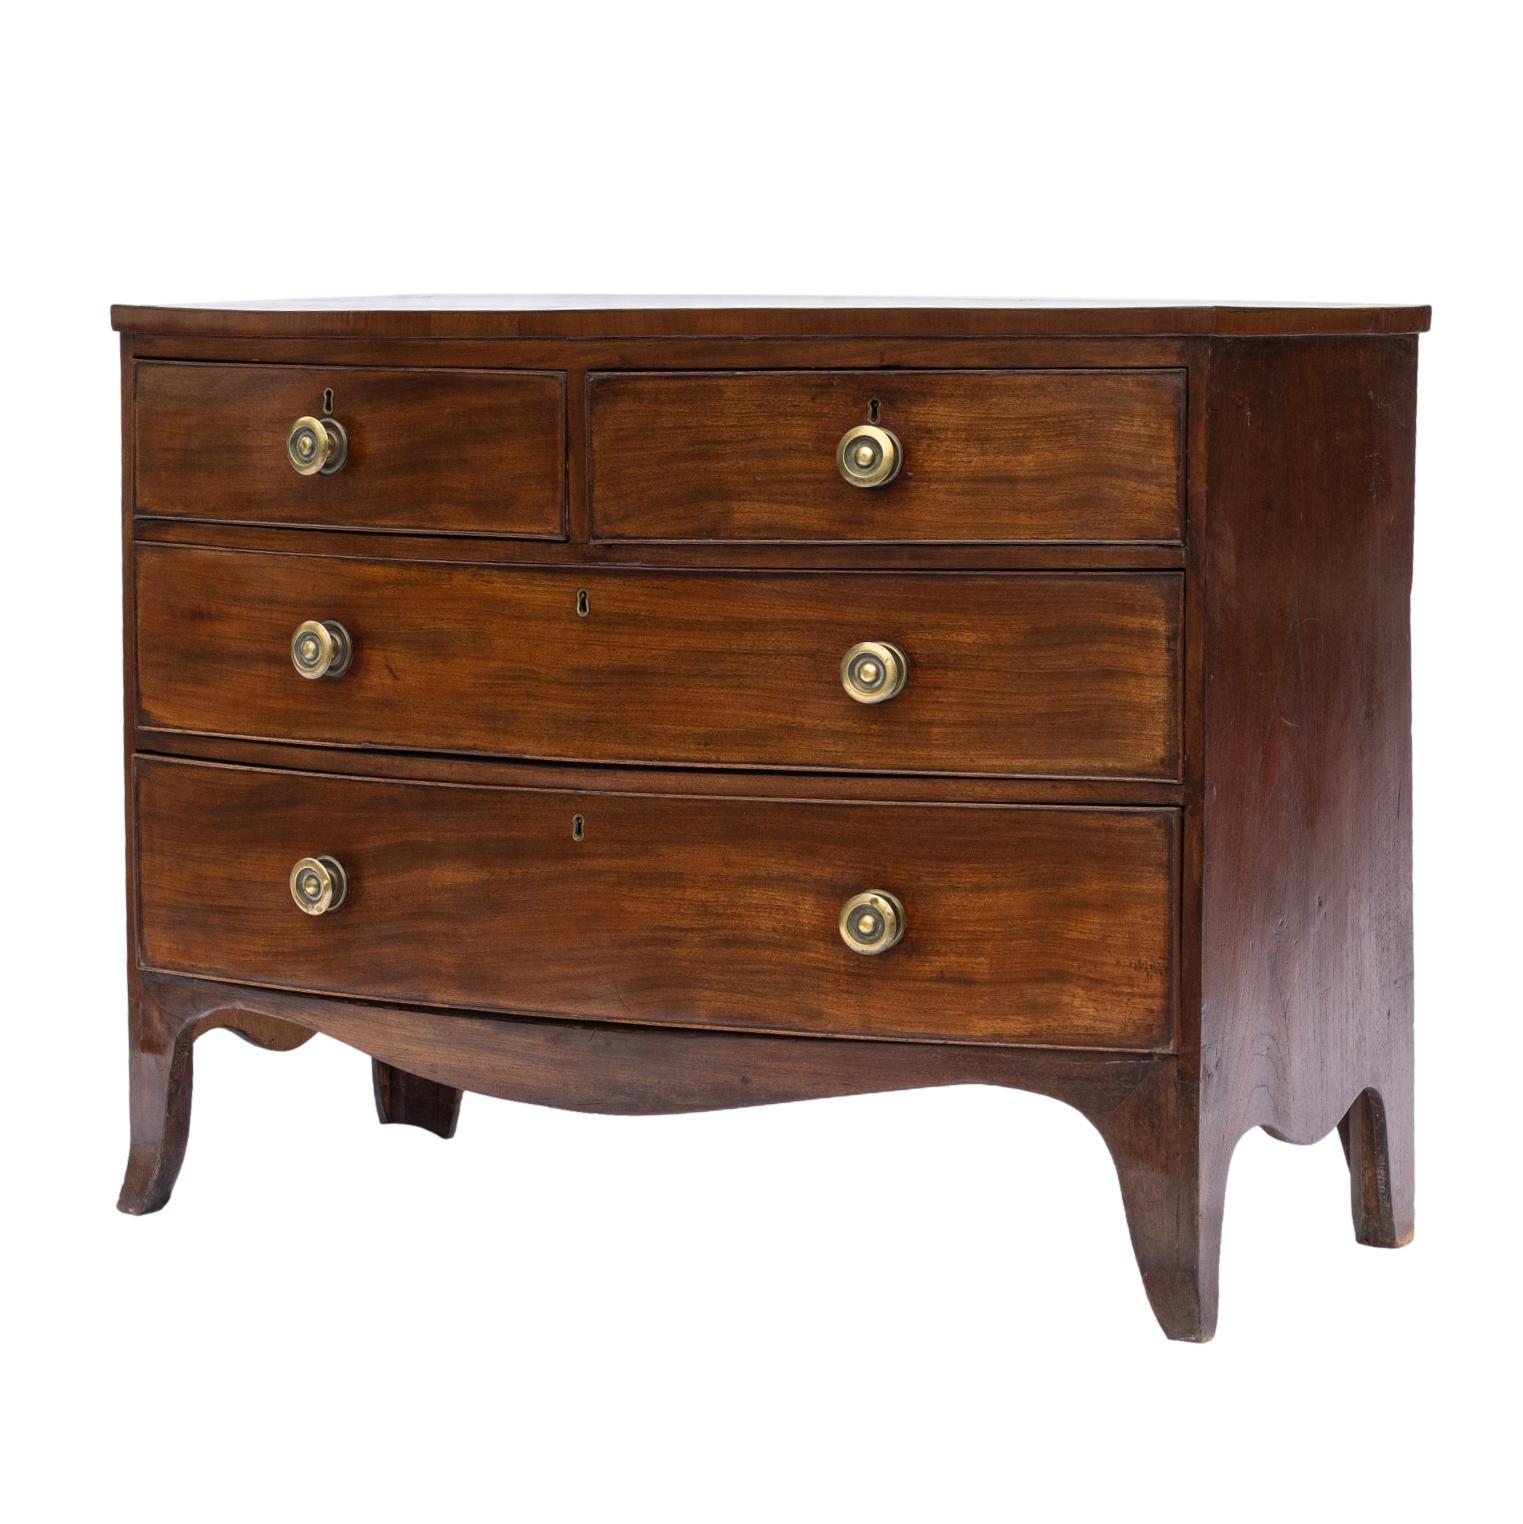 George III Mahogany Bowfront chest-of-drawers, with two short drawers above two long, with cockbeading to the drawers, on a shaped apron with saber legs, the top with satinwood and ebony stringing, with brass knob pulls, English, ca. 1820.